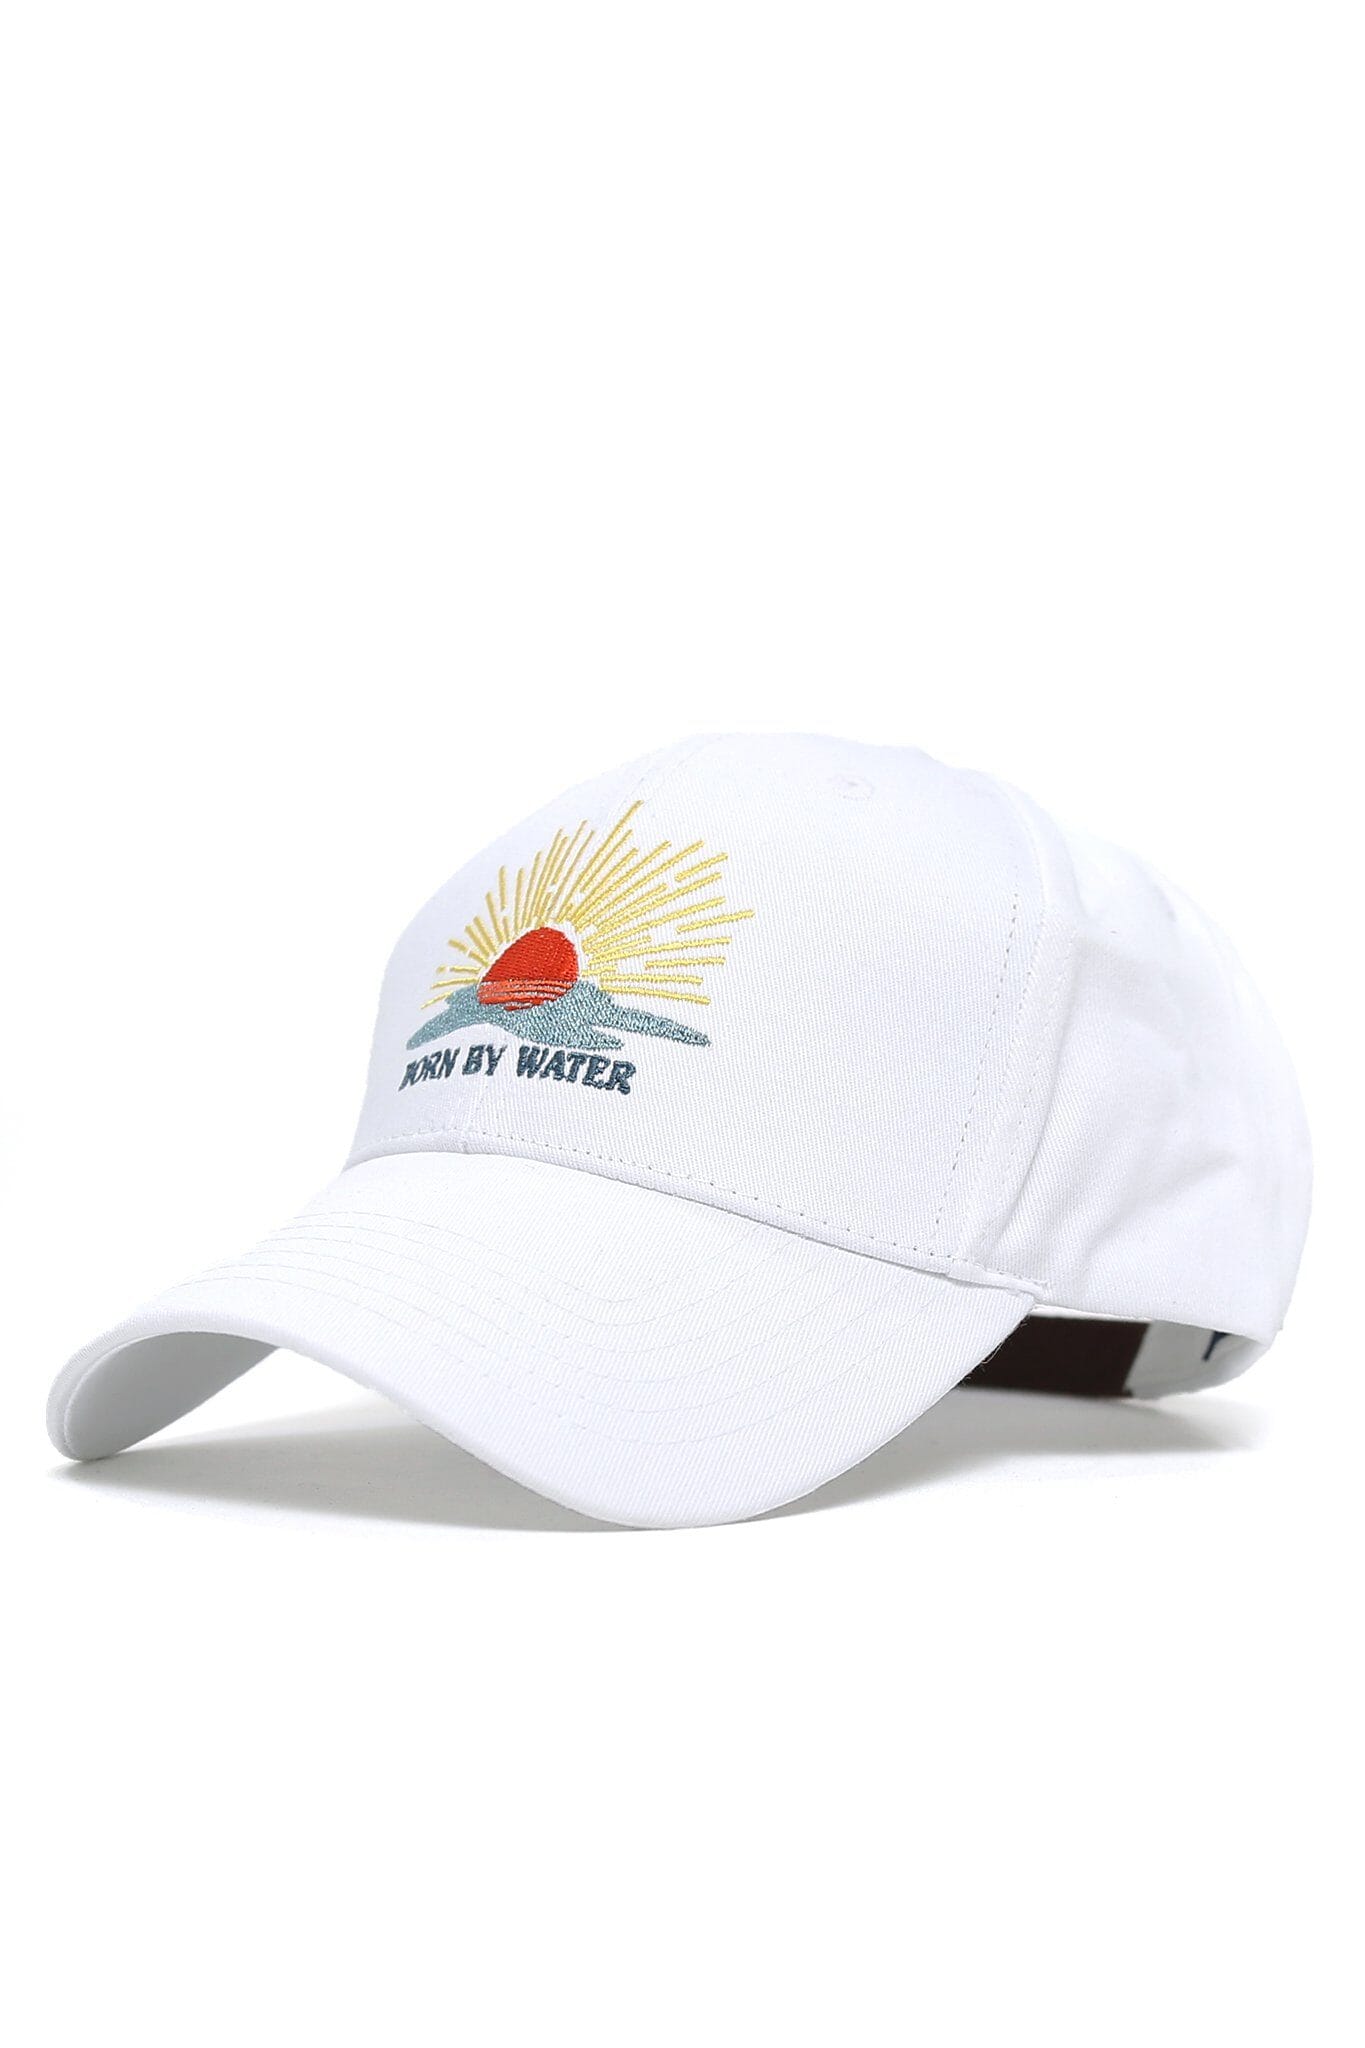 BORN BY WATER SUNSET CAP